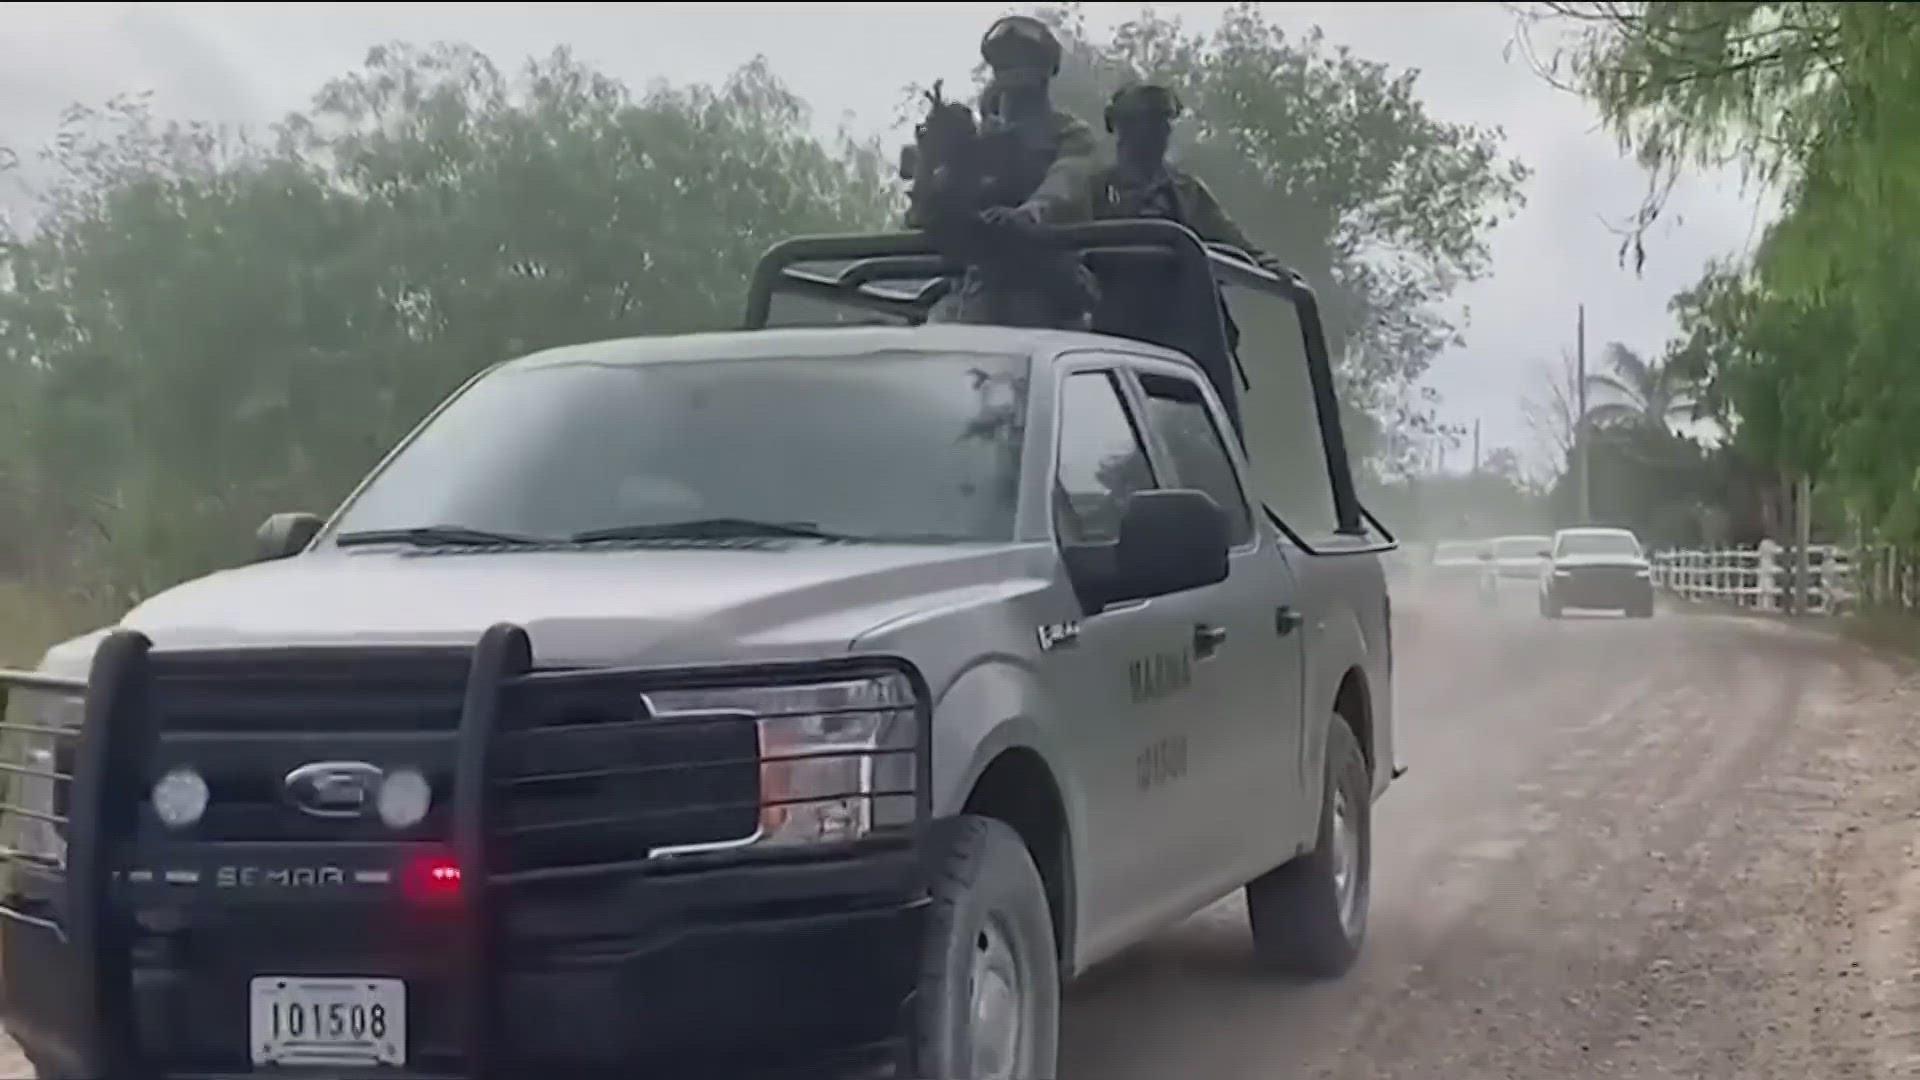 A video capturing four Americans being captured in a deadly ambush resulted in United States officials reimplementing travel restrictions to parts of Mexico.